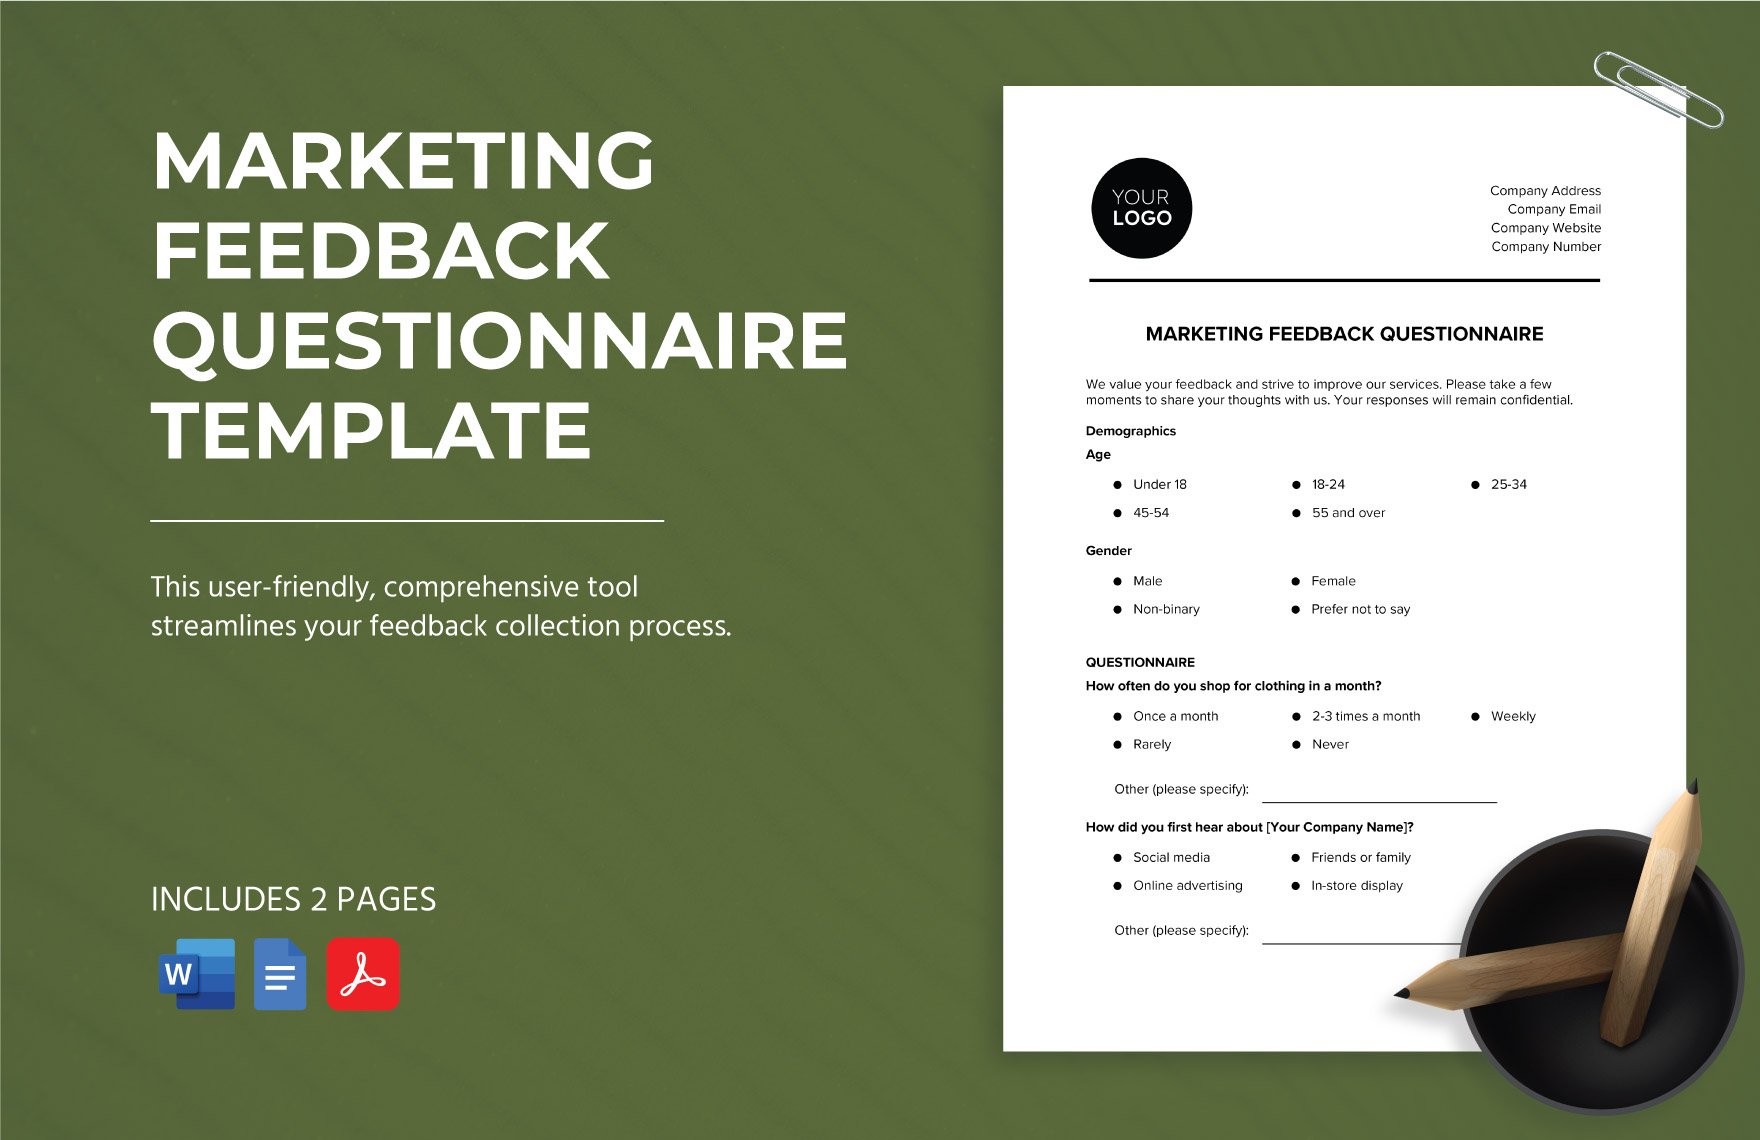 Marketing Feedback Questionnaire Template in Word, Google Docs, PDF